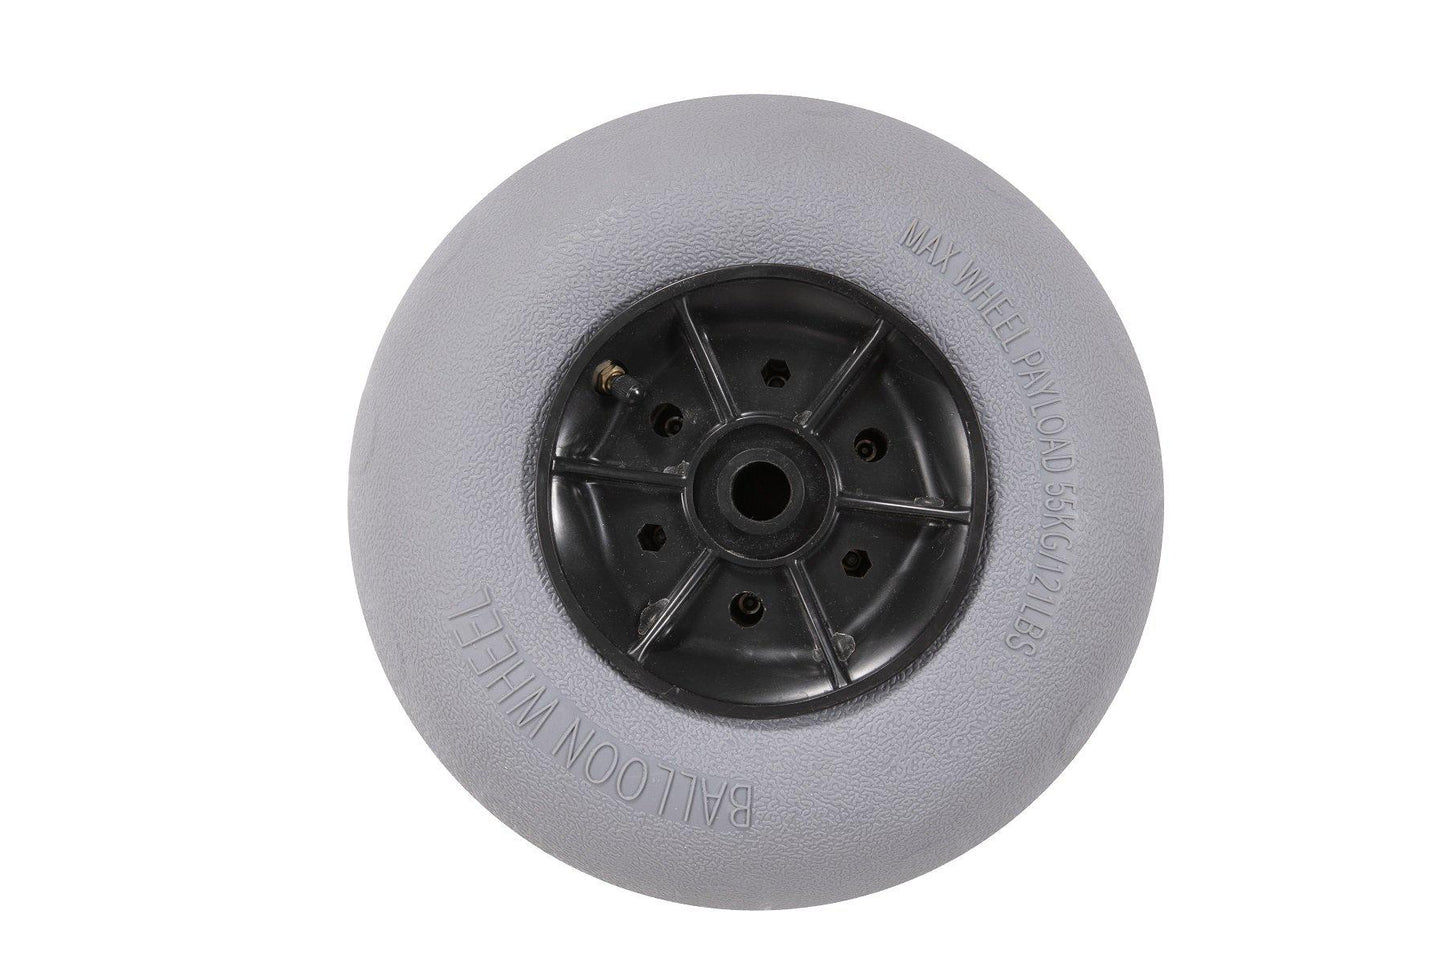 Alumacart 11.8" Balloon Sand Tire - LEAD TIME TO SHIP 10 TO 12 BUSINESS DAYS